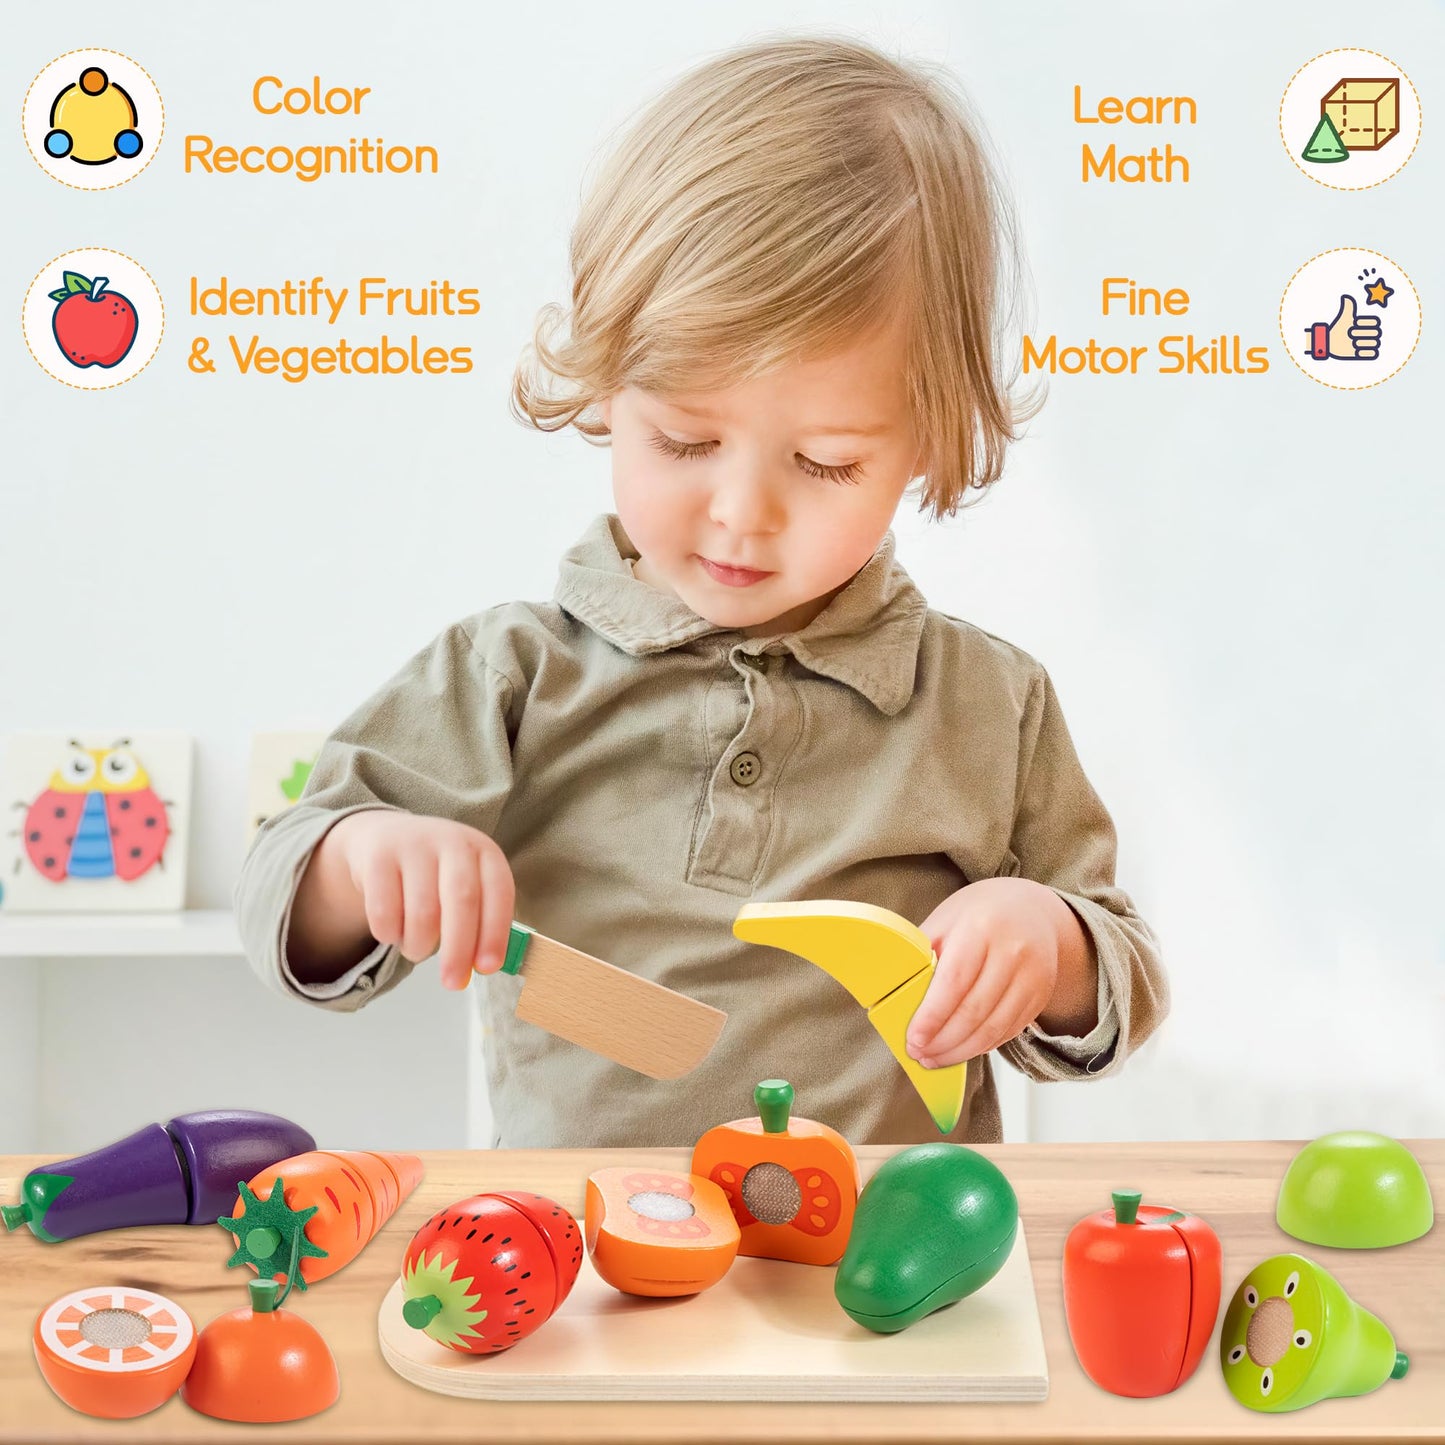 Wooden Play Food for Toddlers, Velcro Fruit and Veggies Cutting Set for Kids, Pretend Food Play Kitchen Accessories for 3 4 5 6 7 Years Old Boys & Girls